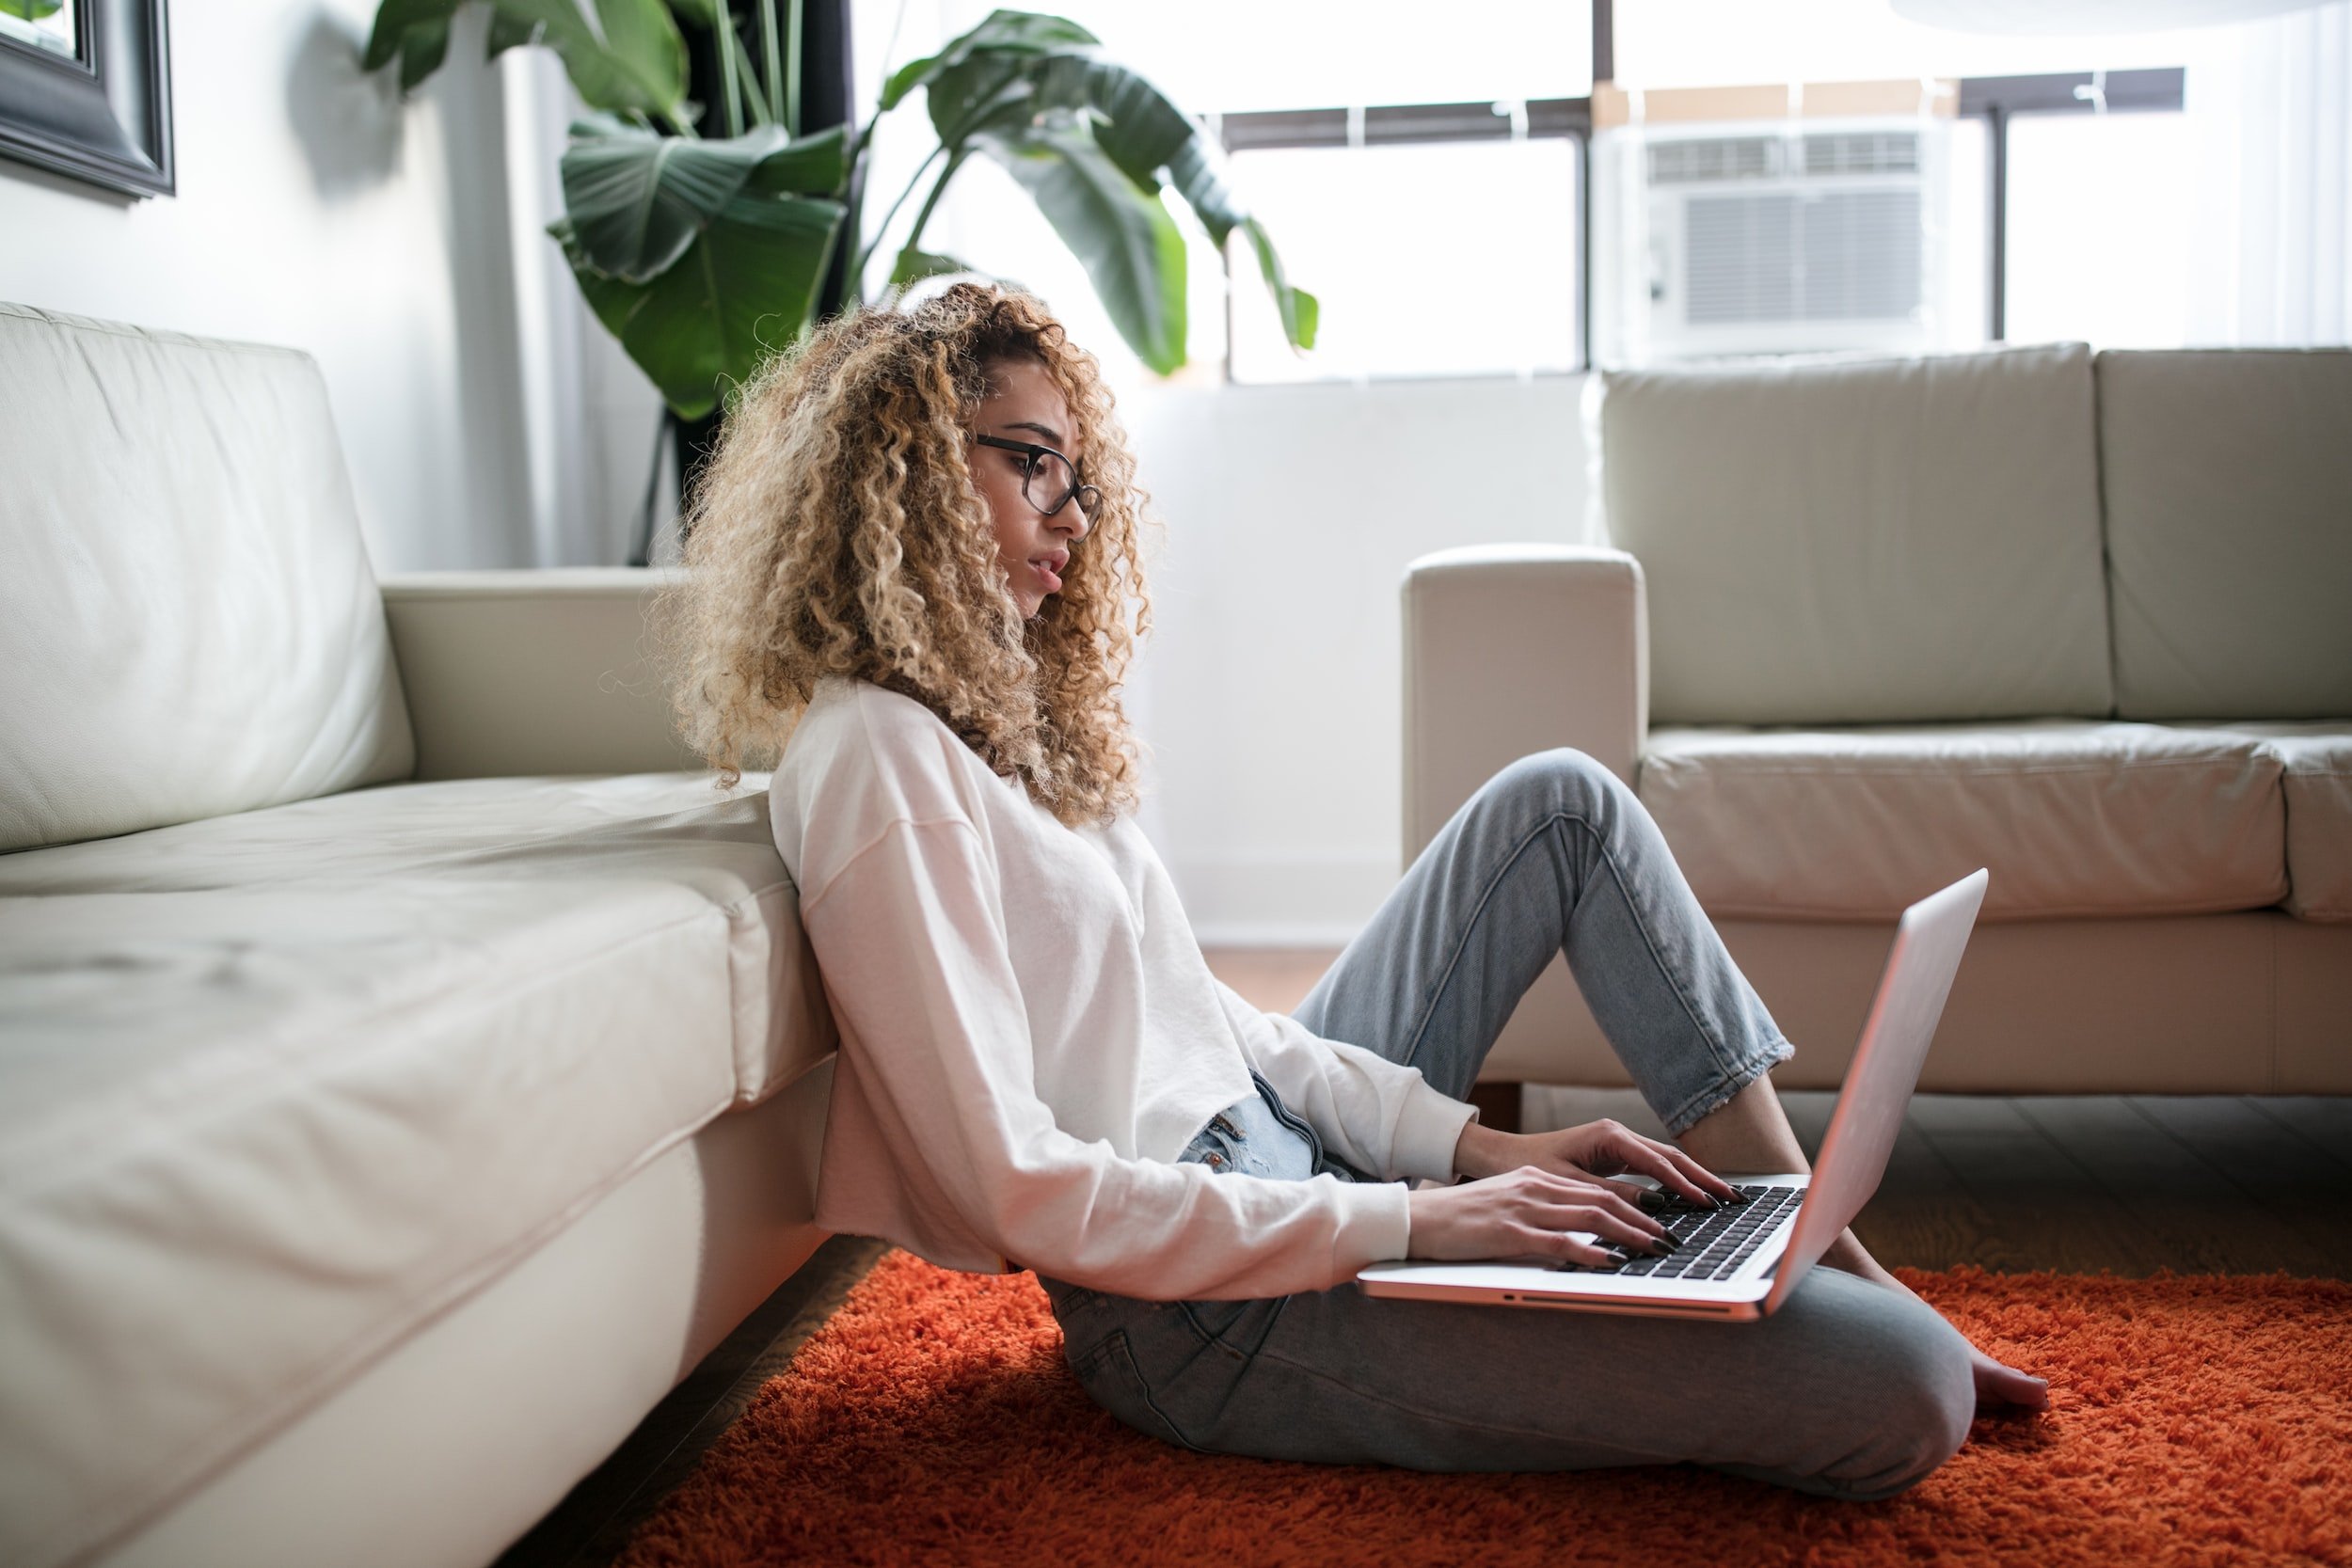 Women with curly blonde hair and glasses sitting on the floor propped up by a couch typing with laptop on her lap